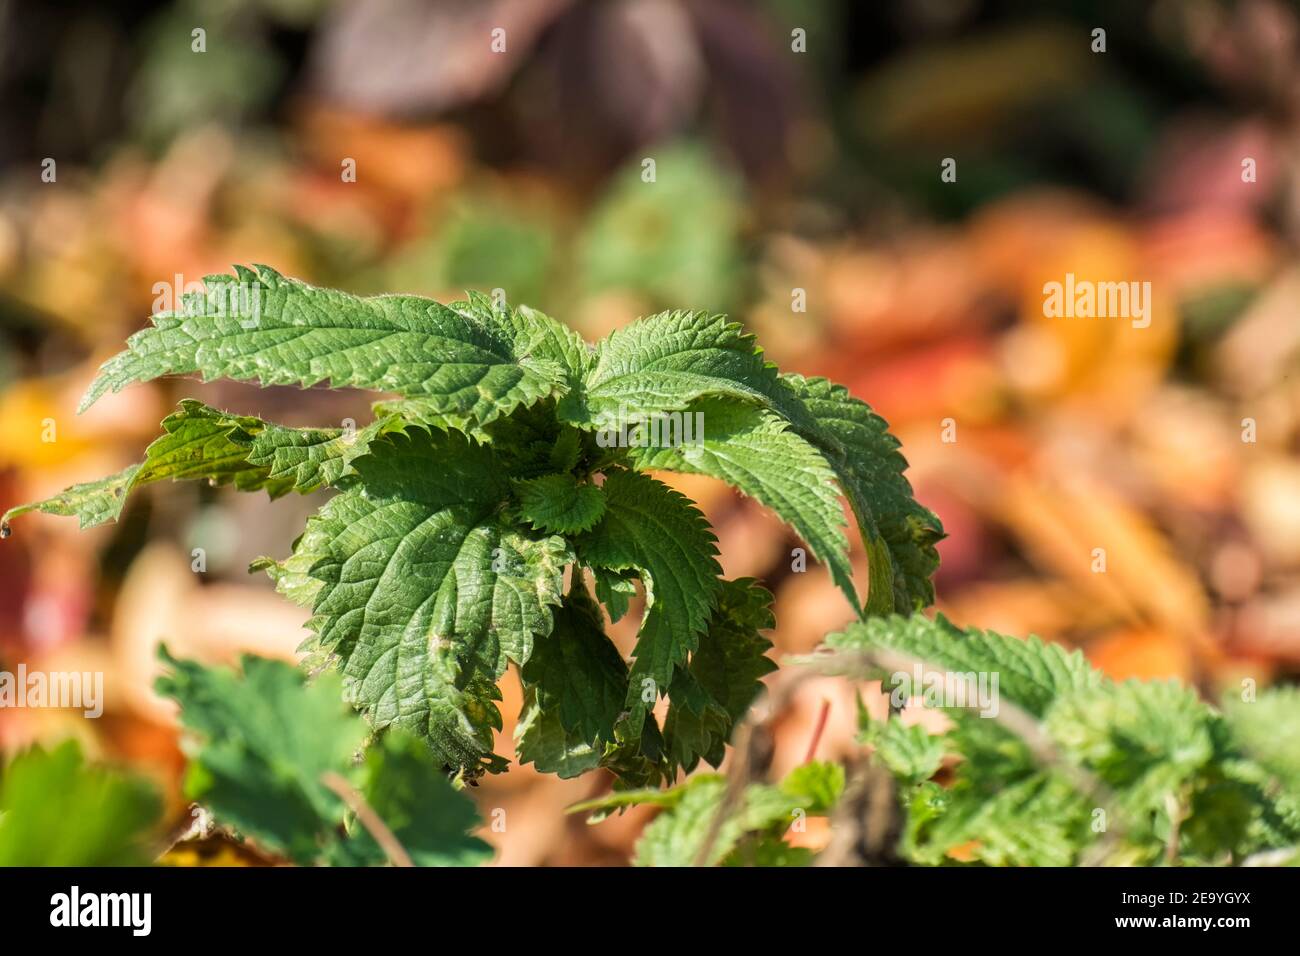 Young shoot of nettles (Urtica dioica) Stock Photo